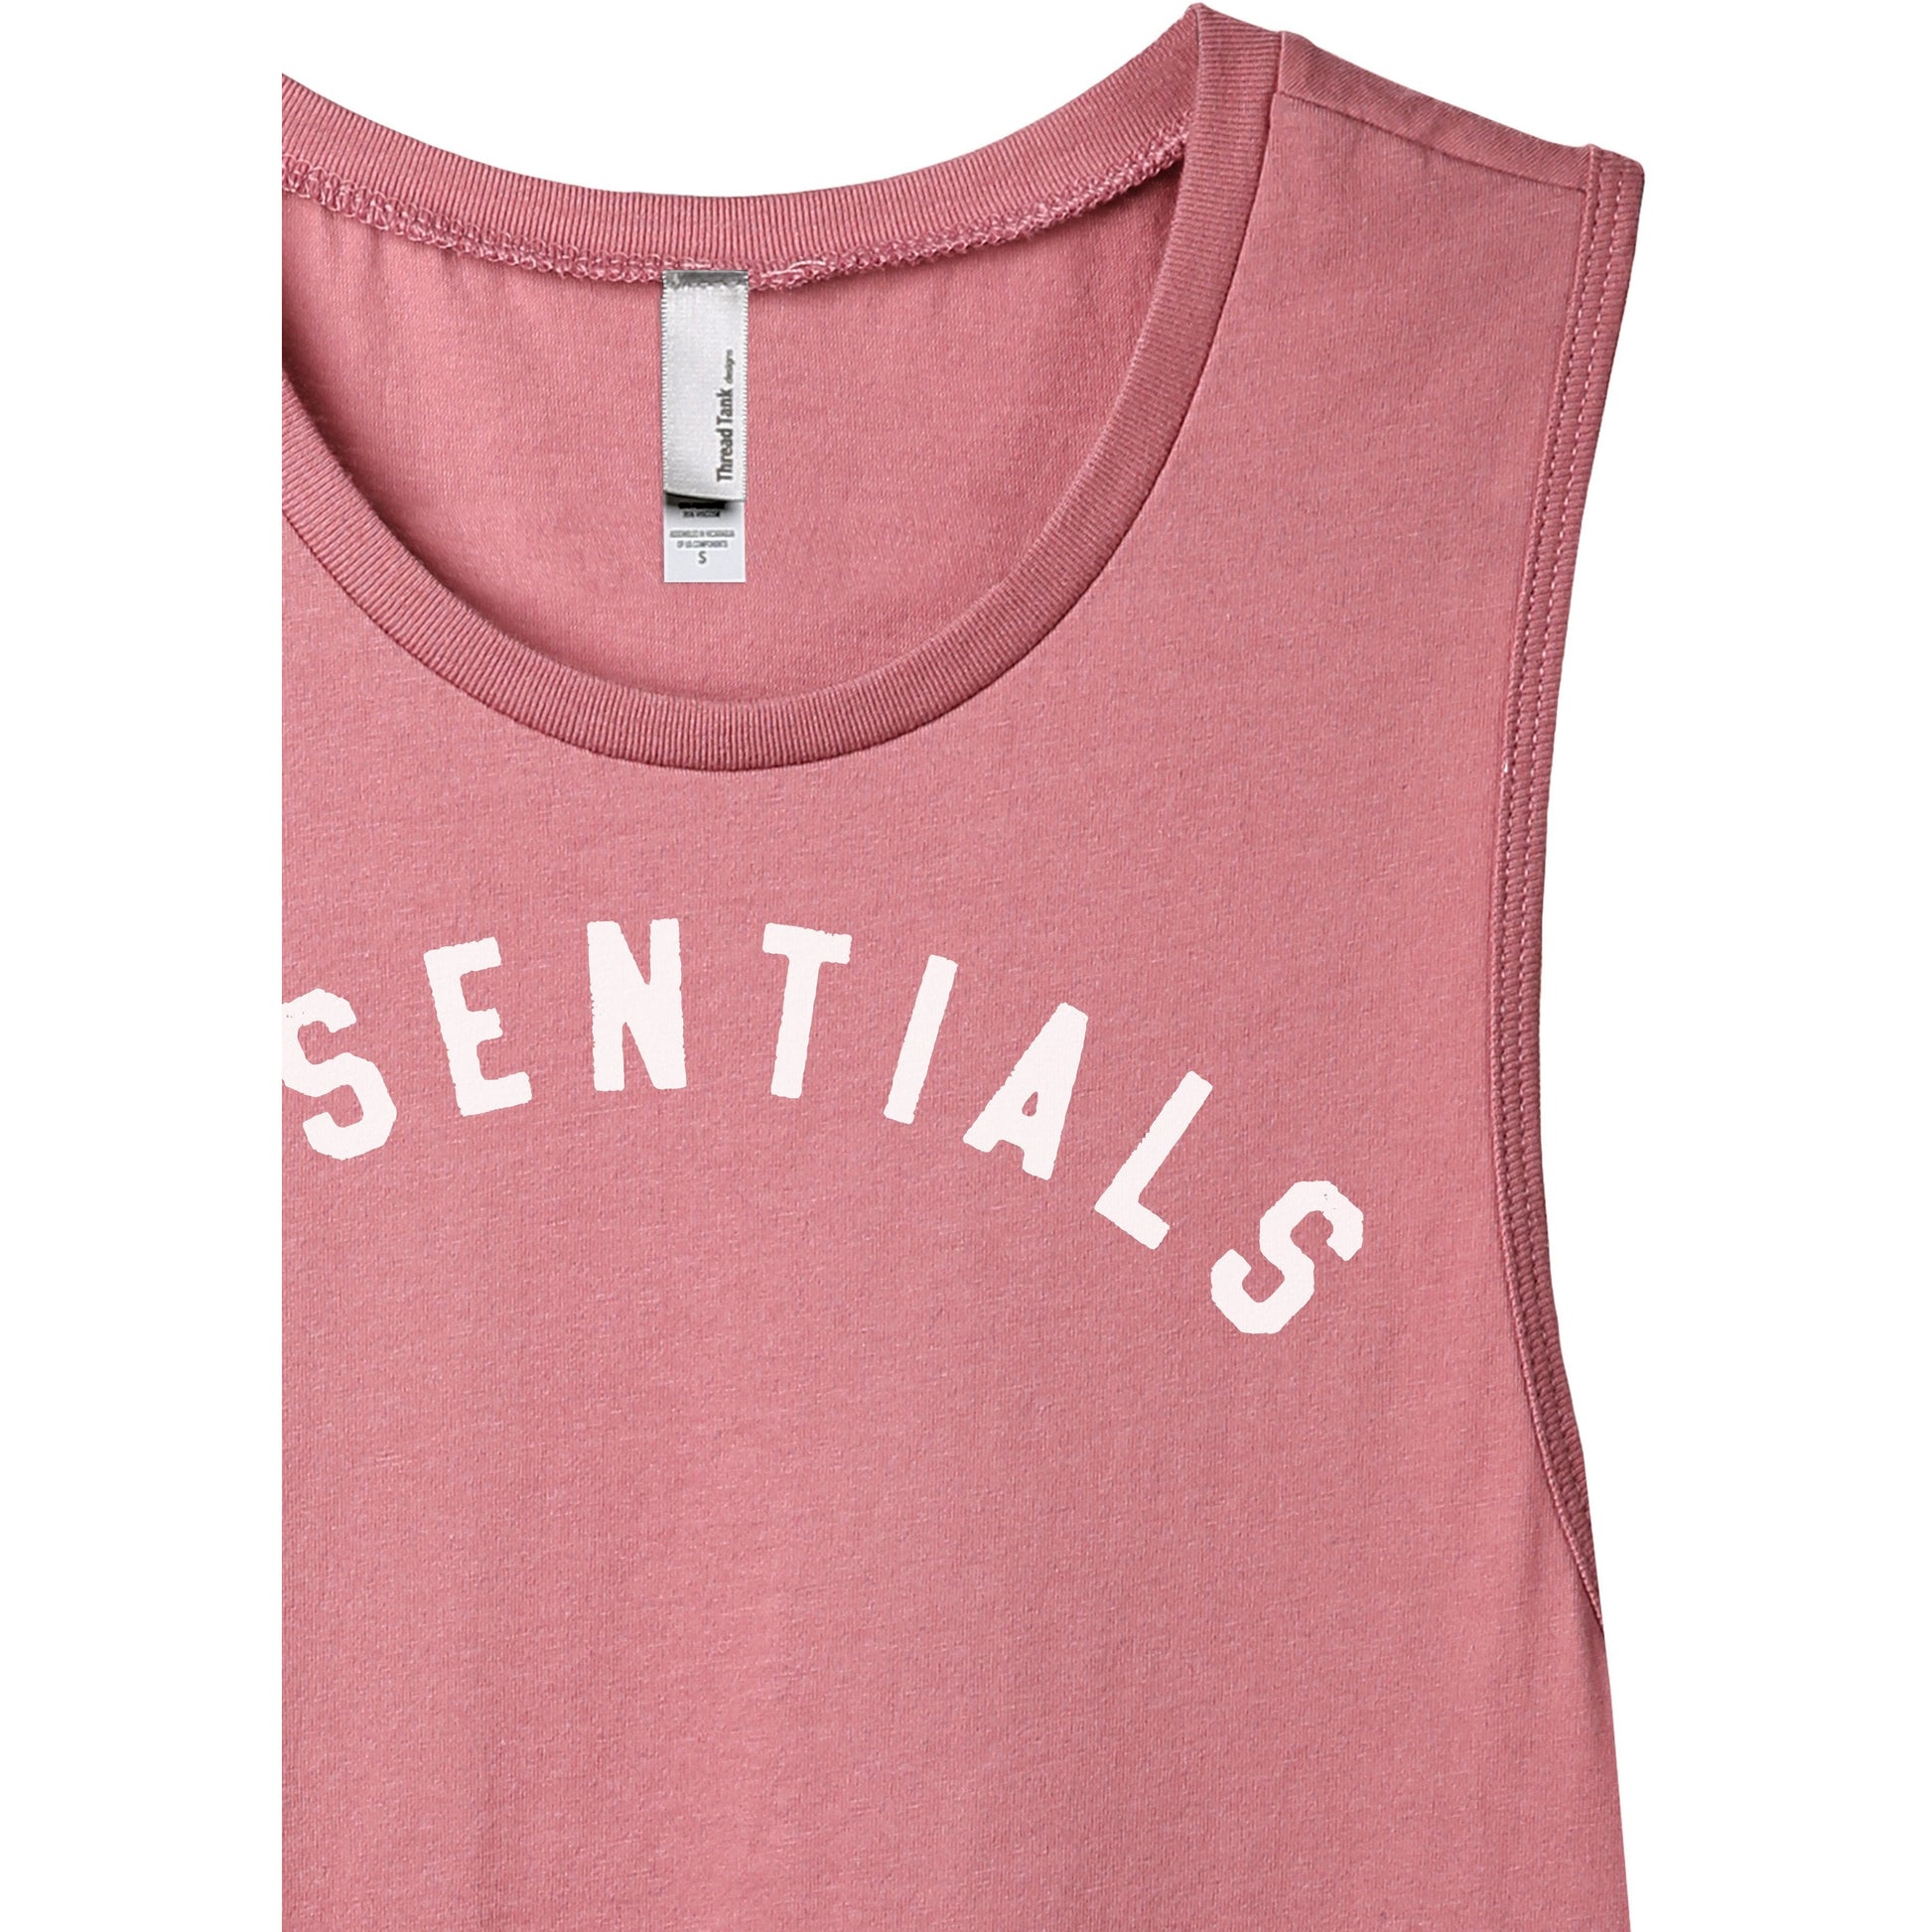 Essentials Women's Relaxed Muscle Tank Tee Rouge Closeup Details
